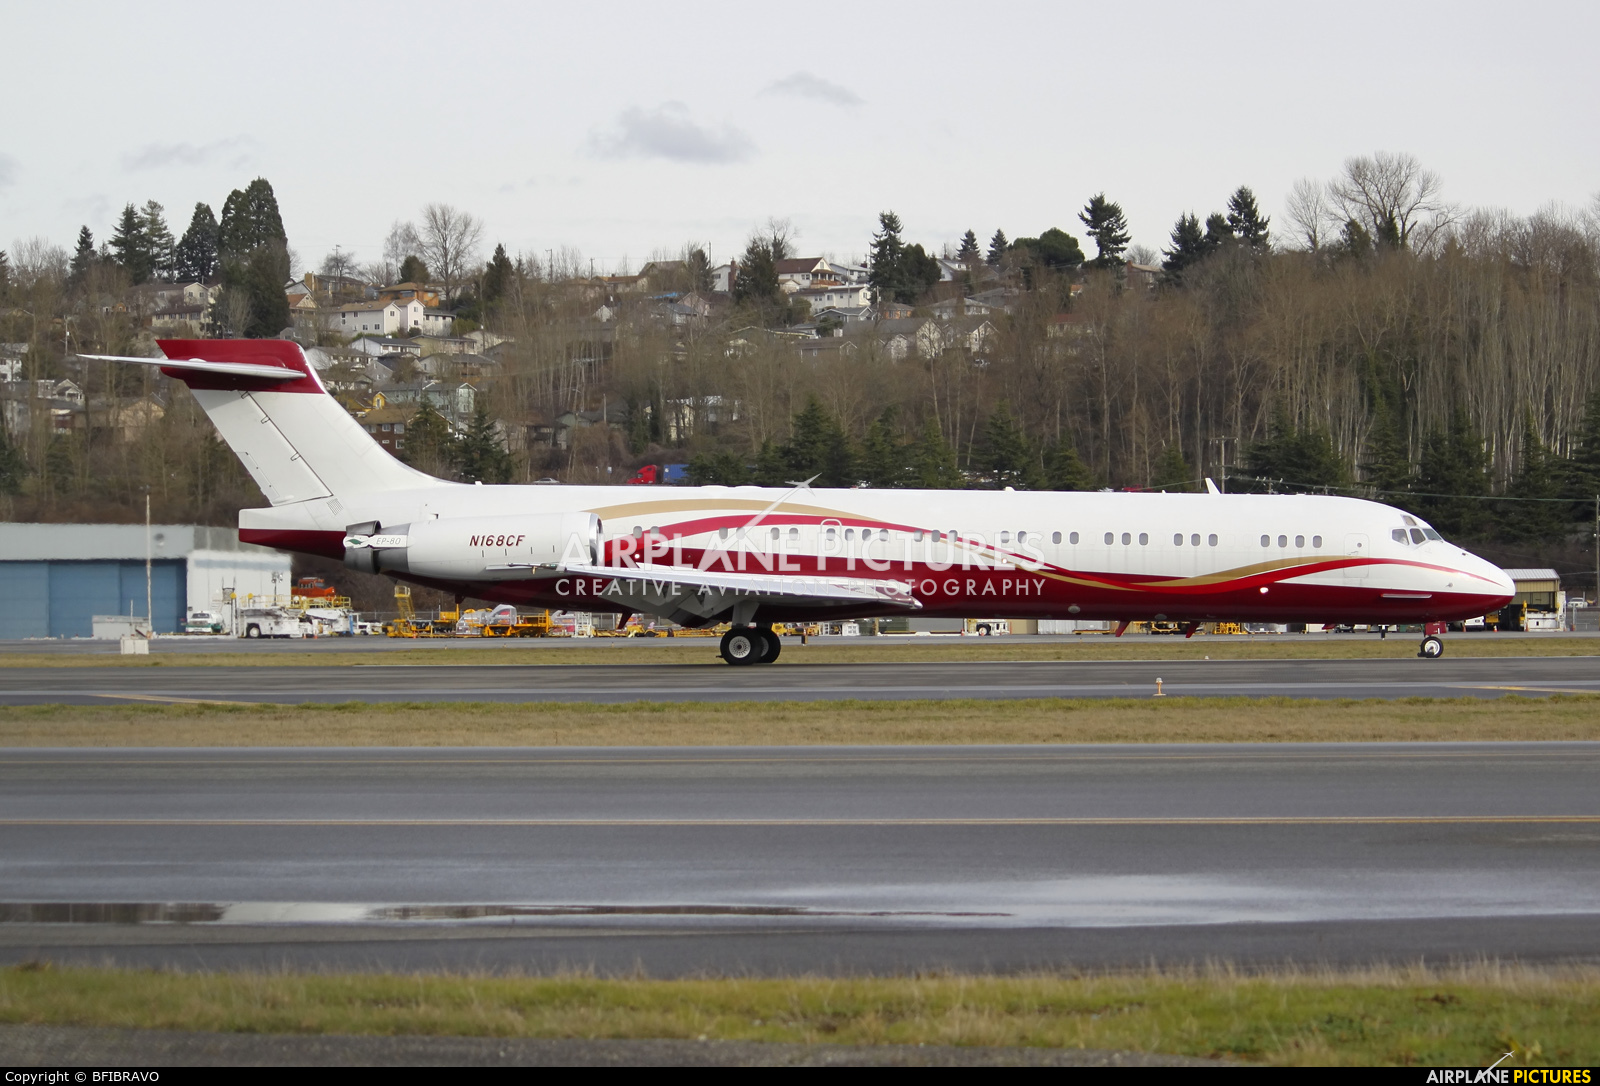 Sunrider Corporation N168CF aircraft at Seattle - Boeing Field / King County Intl